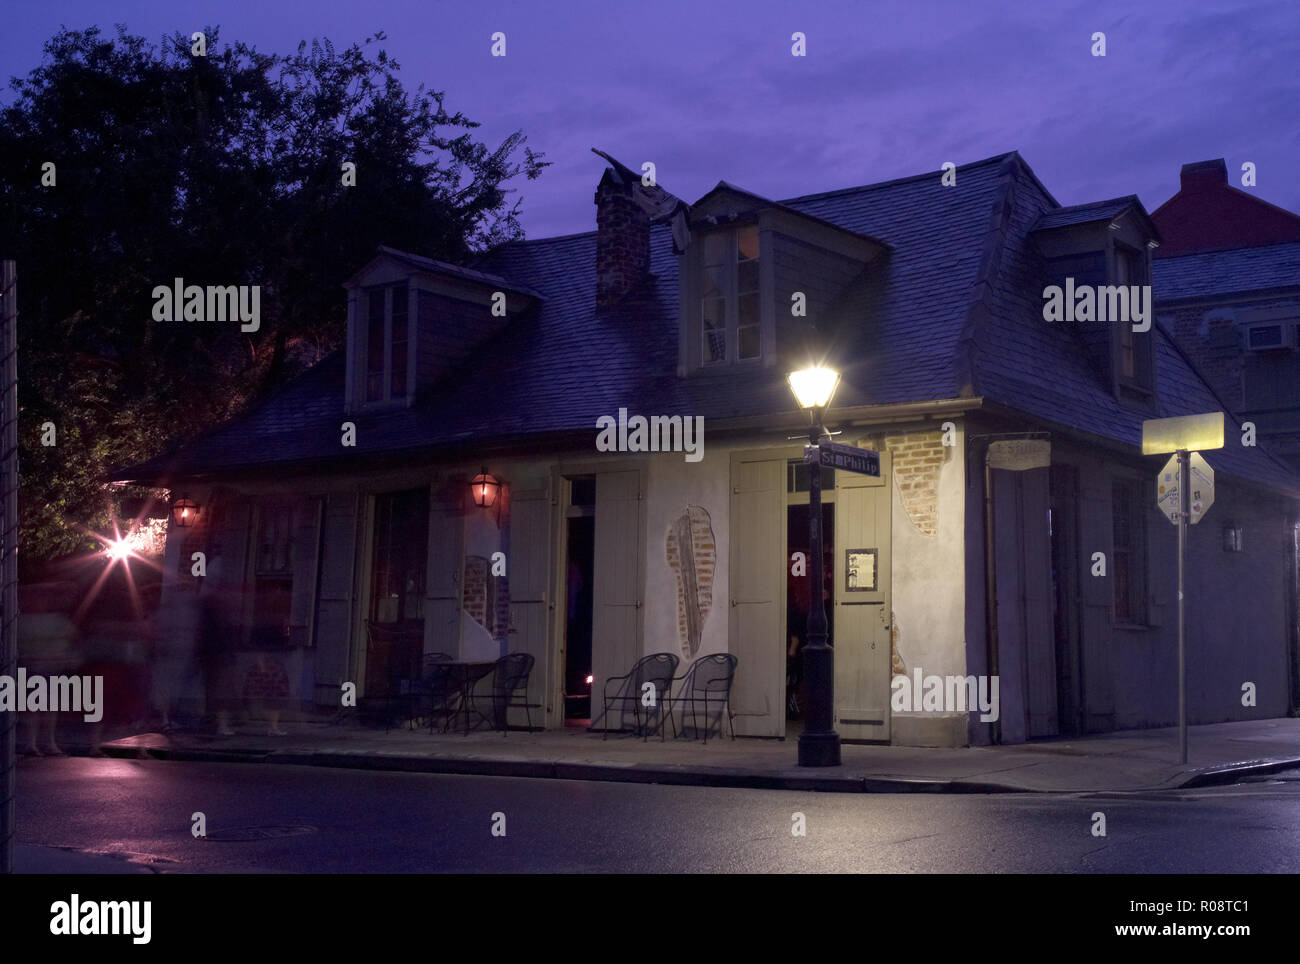 NEW ORLEANS, USA - JULY 18, 2009: Lafitte's Blacksmith Shop in New Orleans, Louisiana in the evening. A famous tourist attraction and old bar. Stock Photo